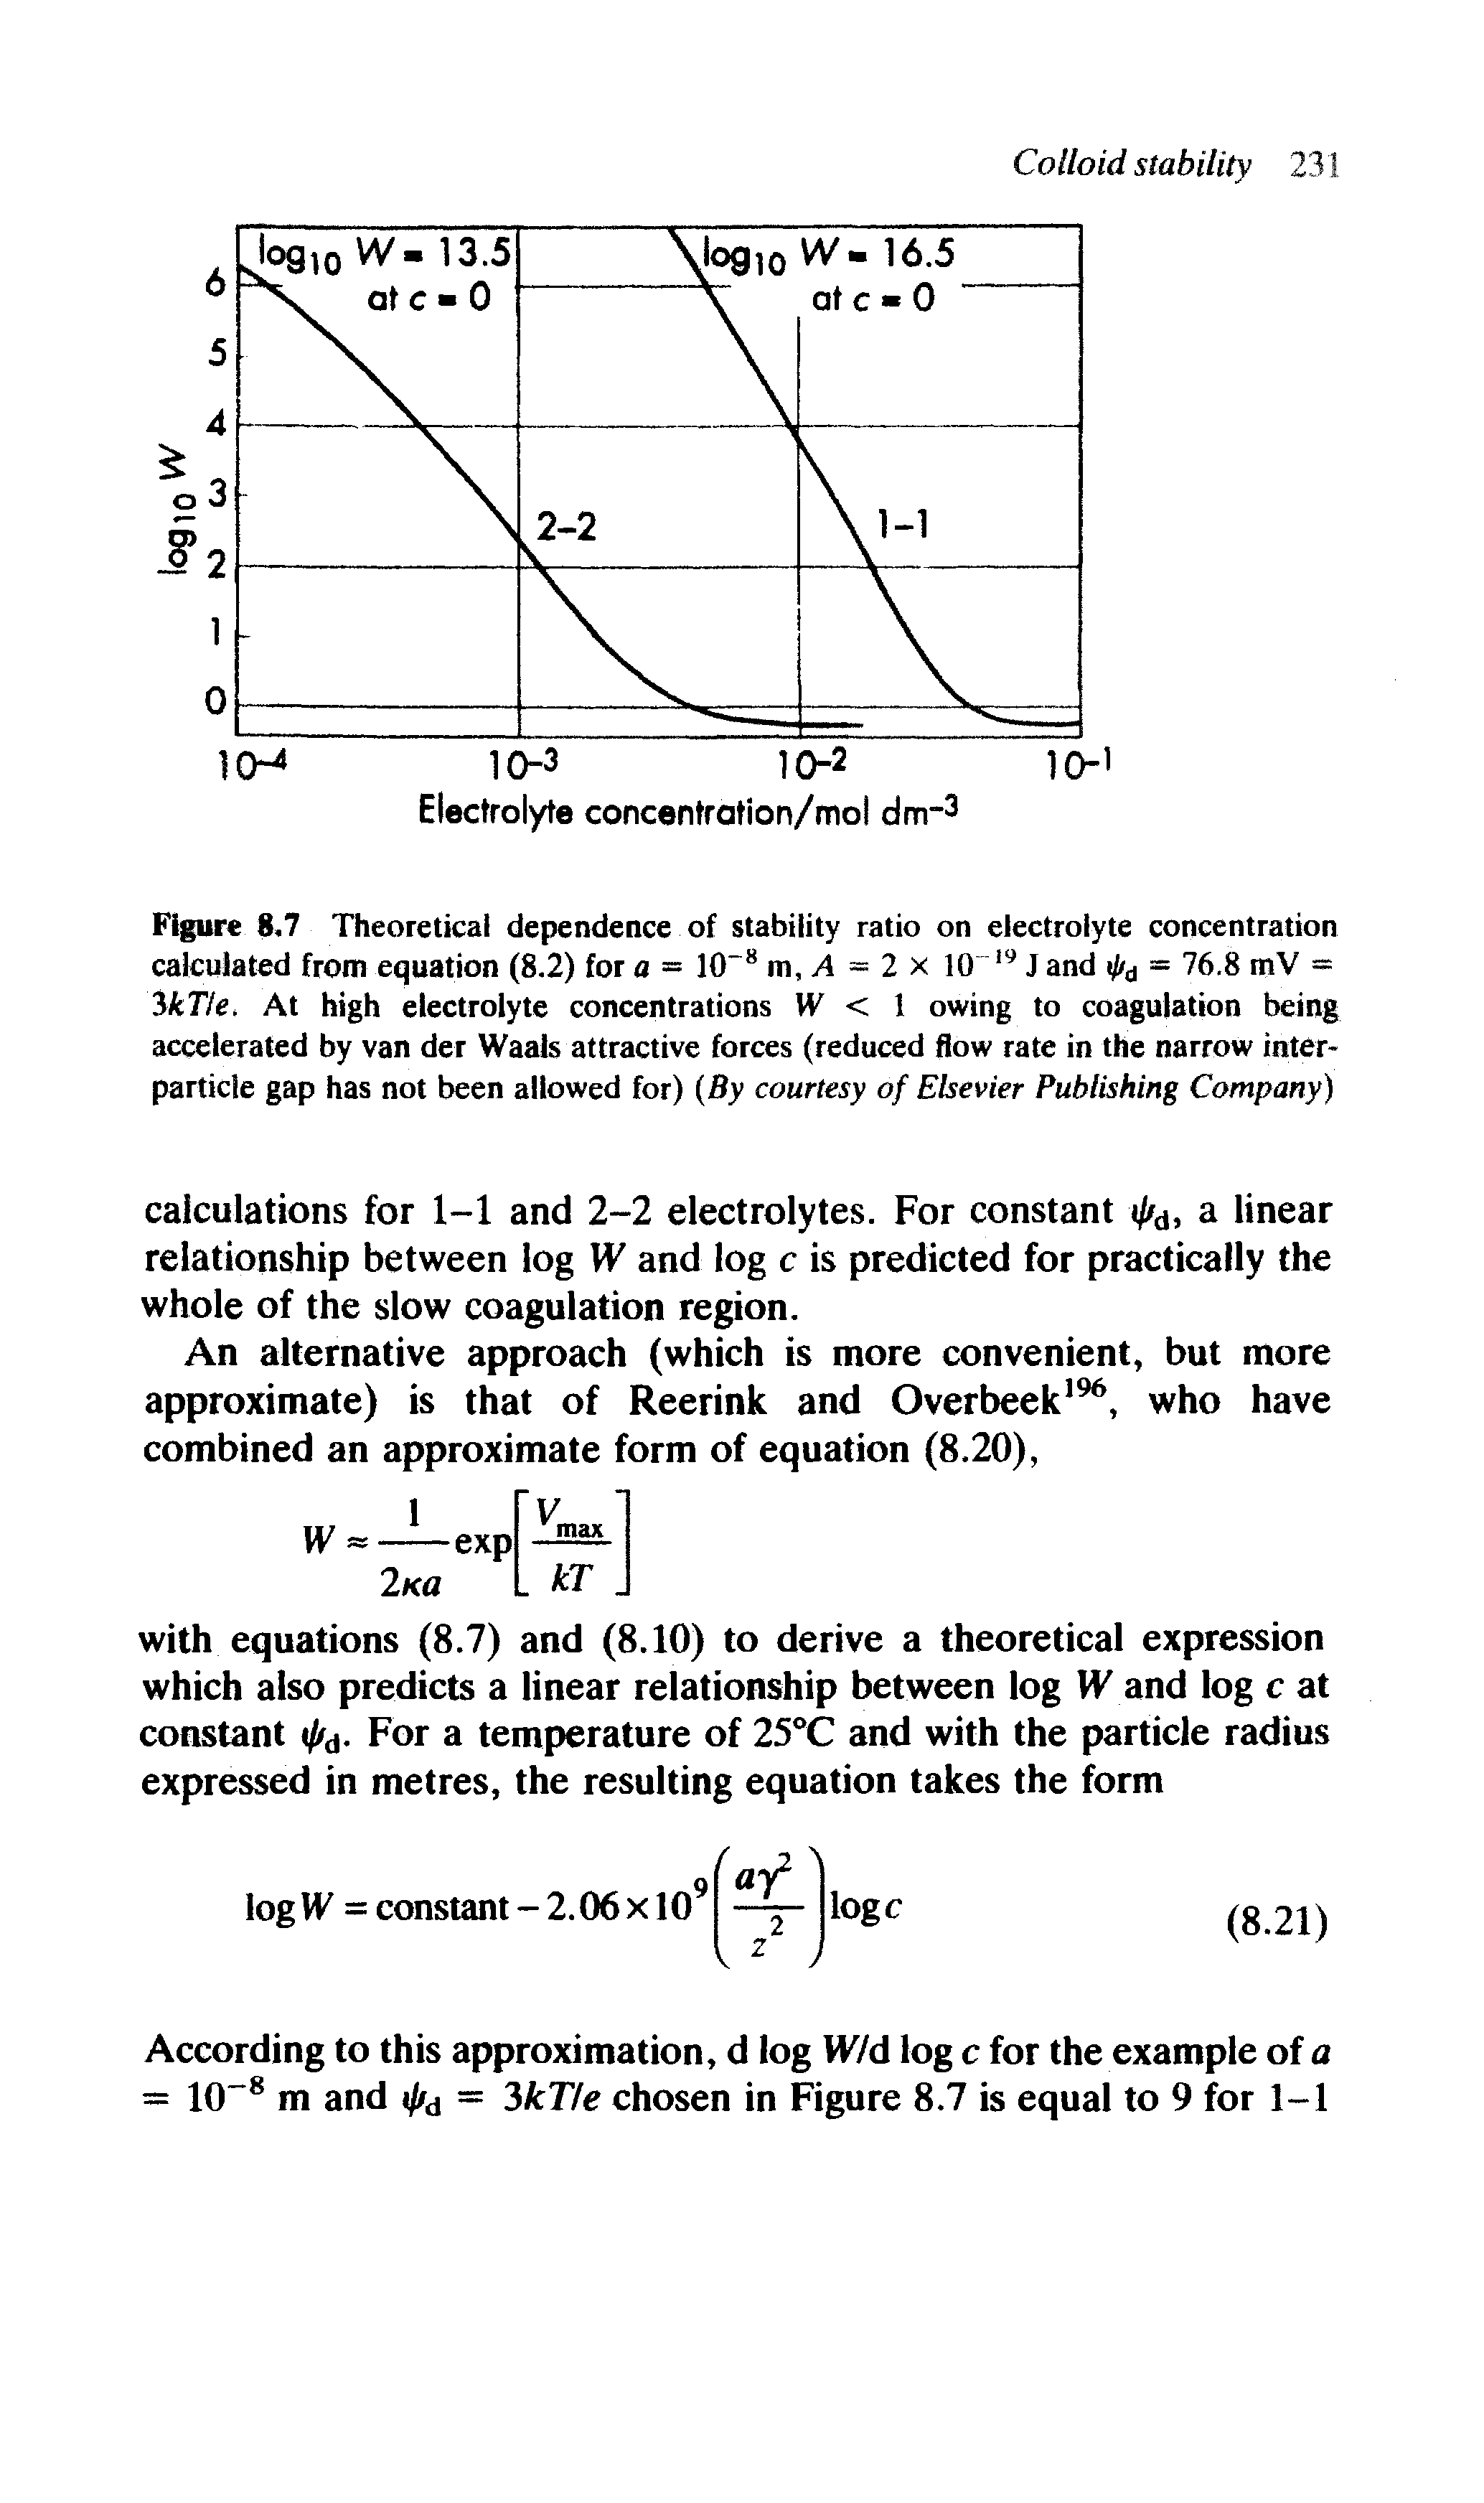 Figure 8,7 Theoretical dependence of stability ratio on electrolyte concentration calculated from equation (8.2) for a = 1CT8 m, A = 2 x 10 19 J and fa = 76.8 mV = 3kT/e> At high electrolyte concentrations W < 1 owing to coagulation being accelerated by van der Waals attractive forces (reduced flow rate in the narrow inter-particle gap has not been allowed for) (By courtesy of Elsevier Publishing Company)...